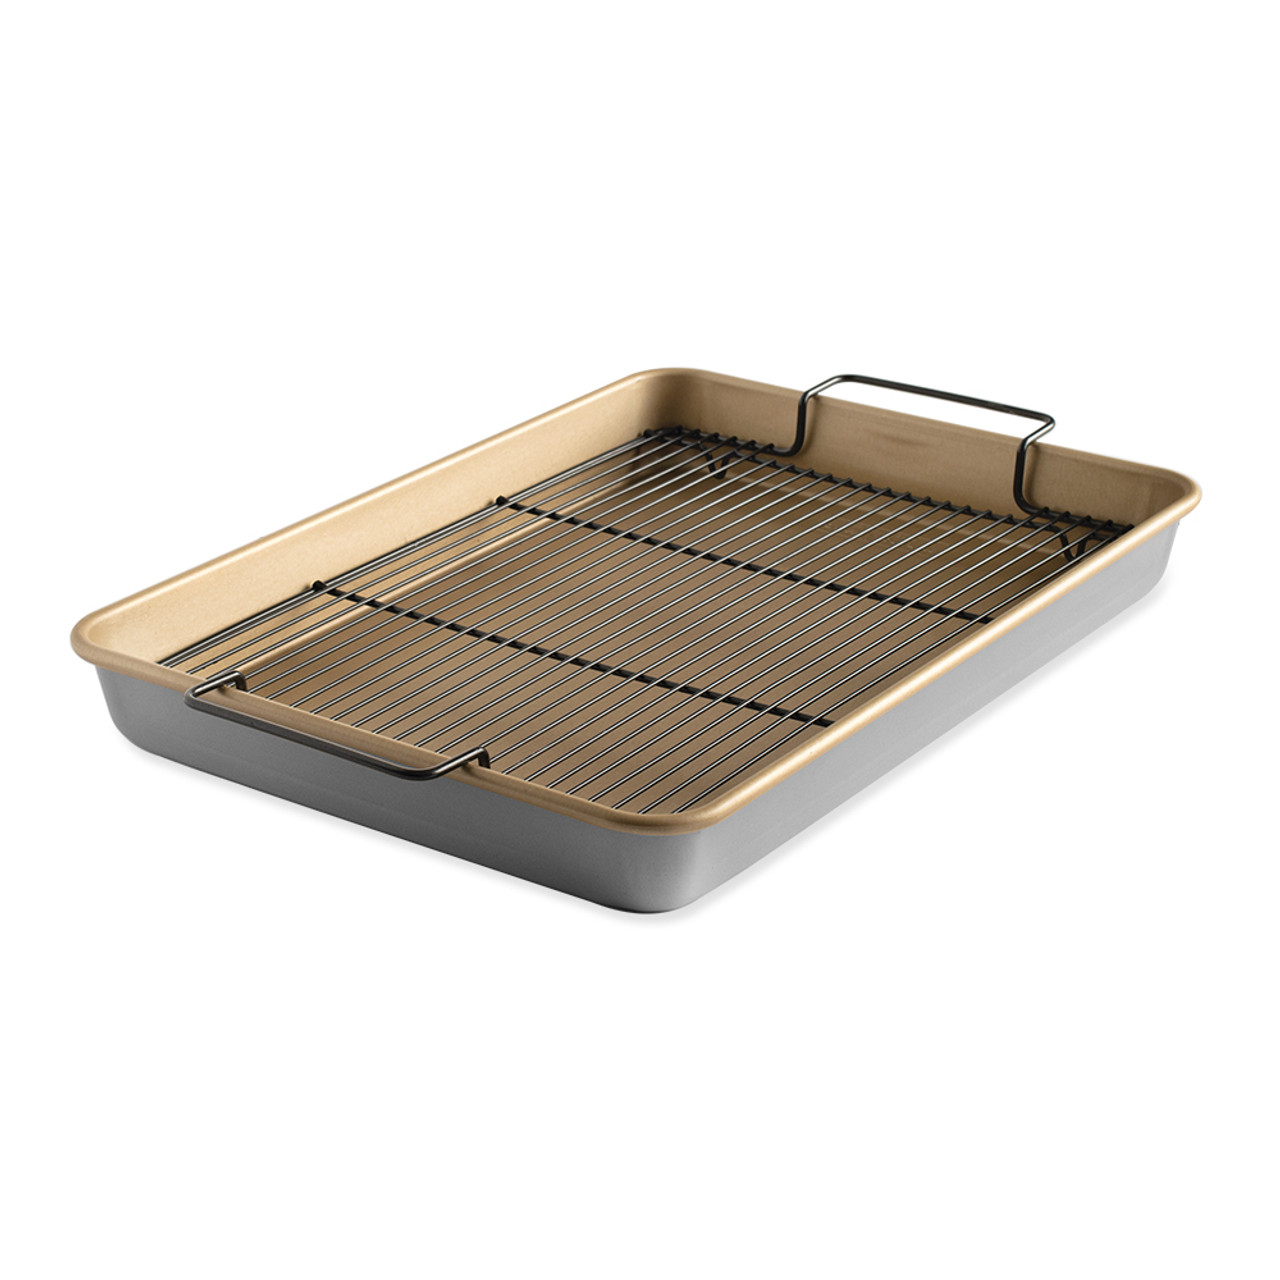 Nordic Ware Extra Large Oven Crisp Baking Tray with Rack - NEW